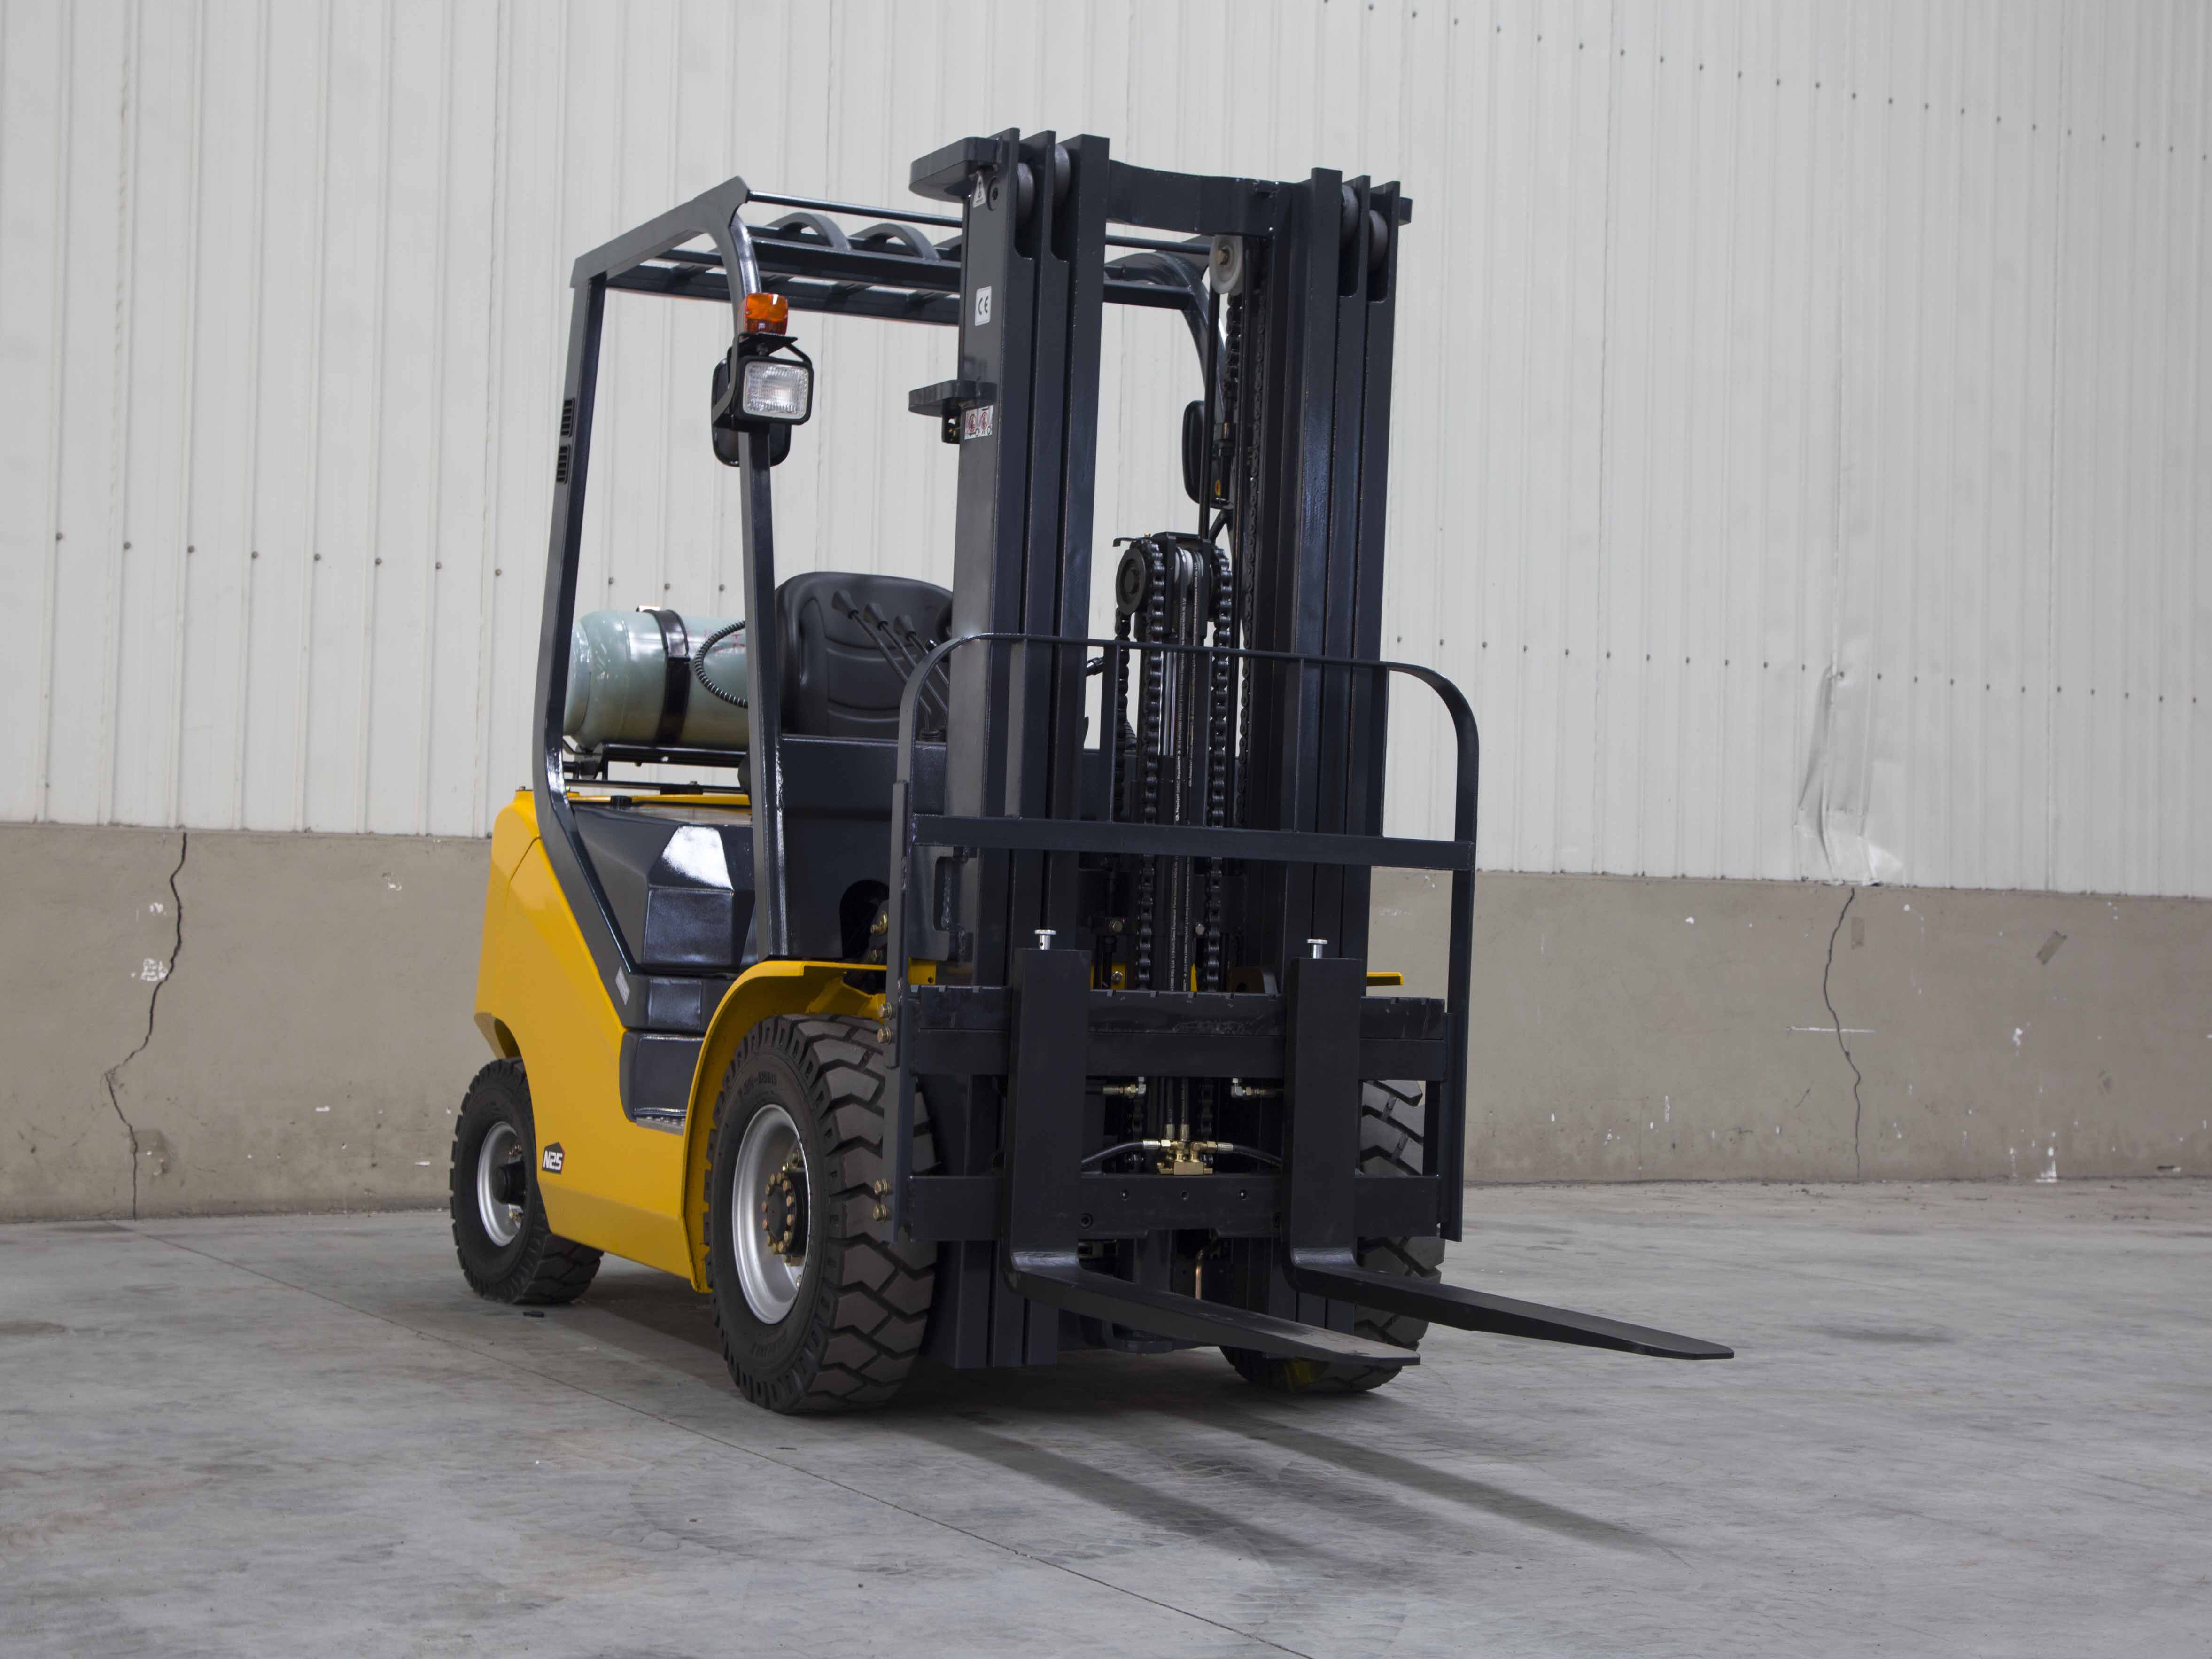 Top brand of China Manufacture Japanese Engine XCB-D35 Diesel Forklift 3.5T Truck Lift Stacker Price manufacture